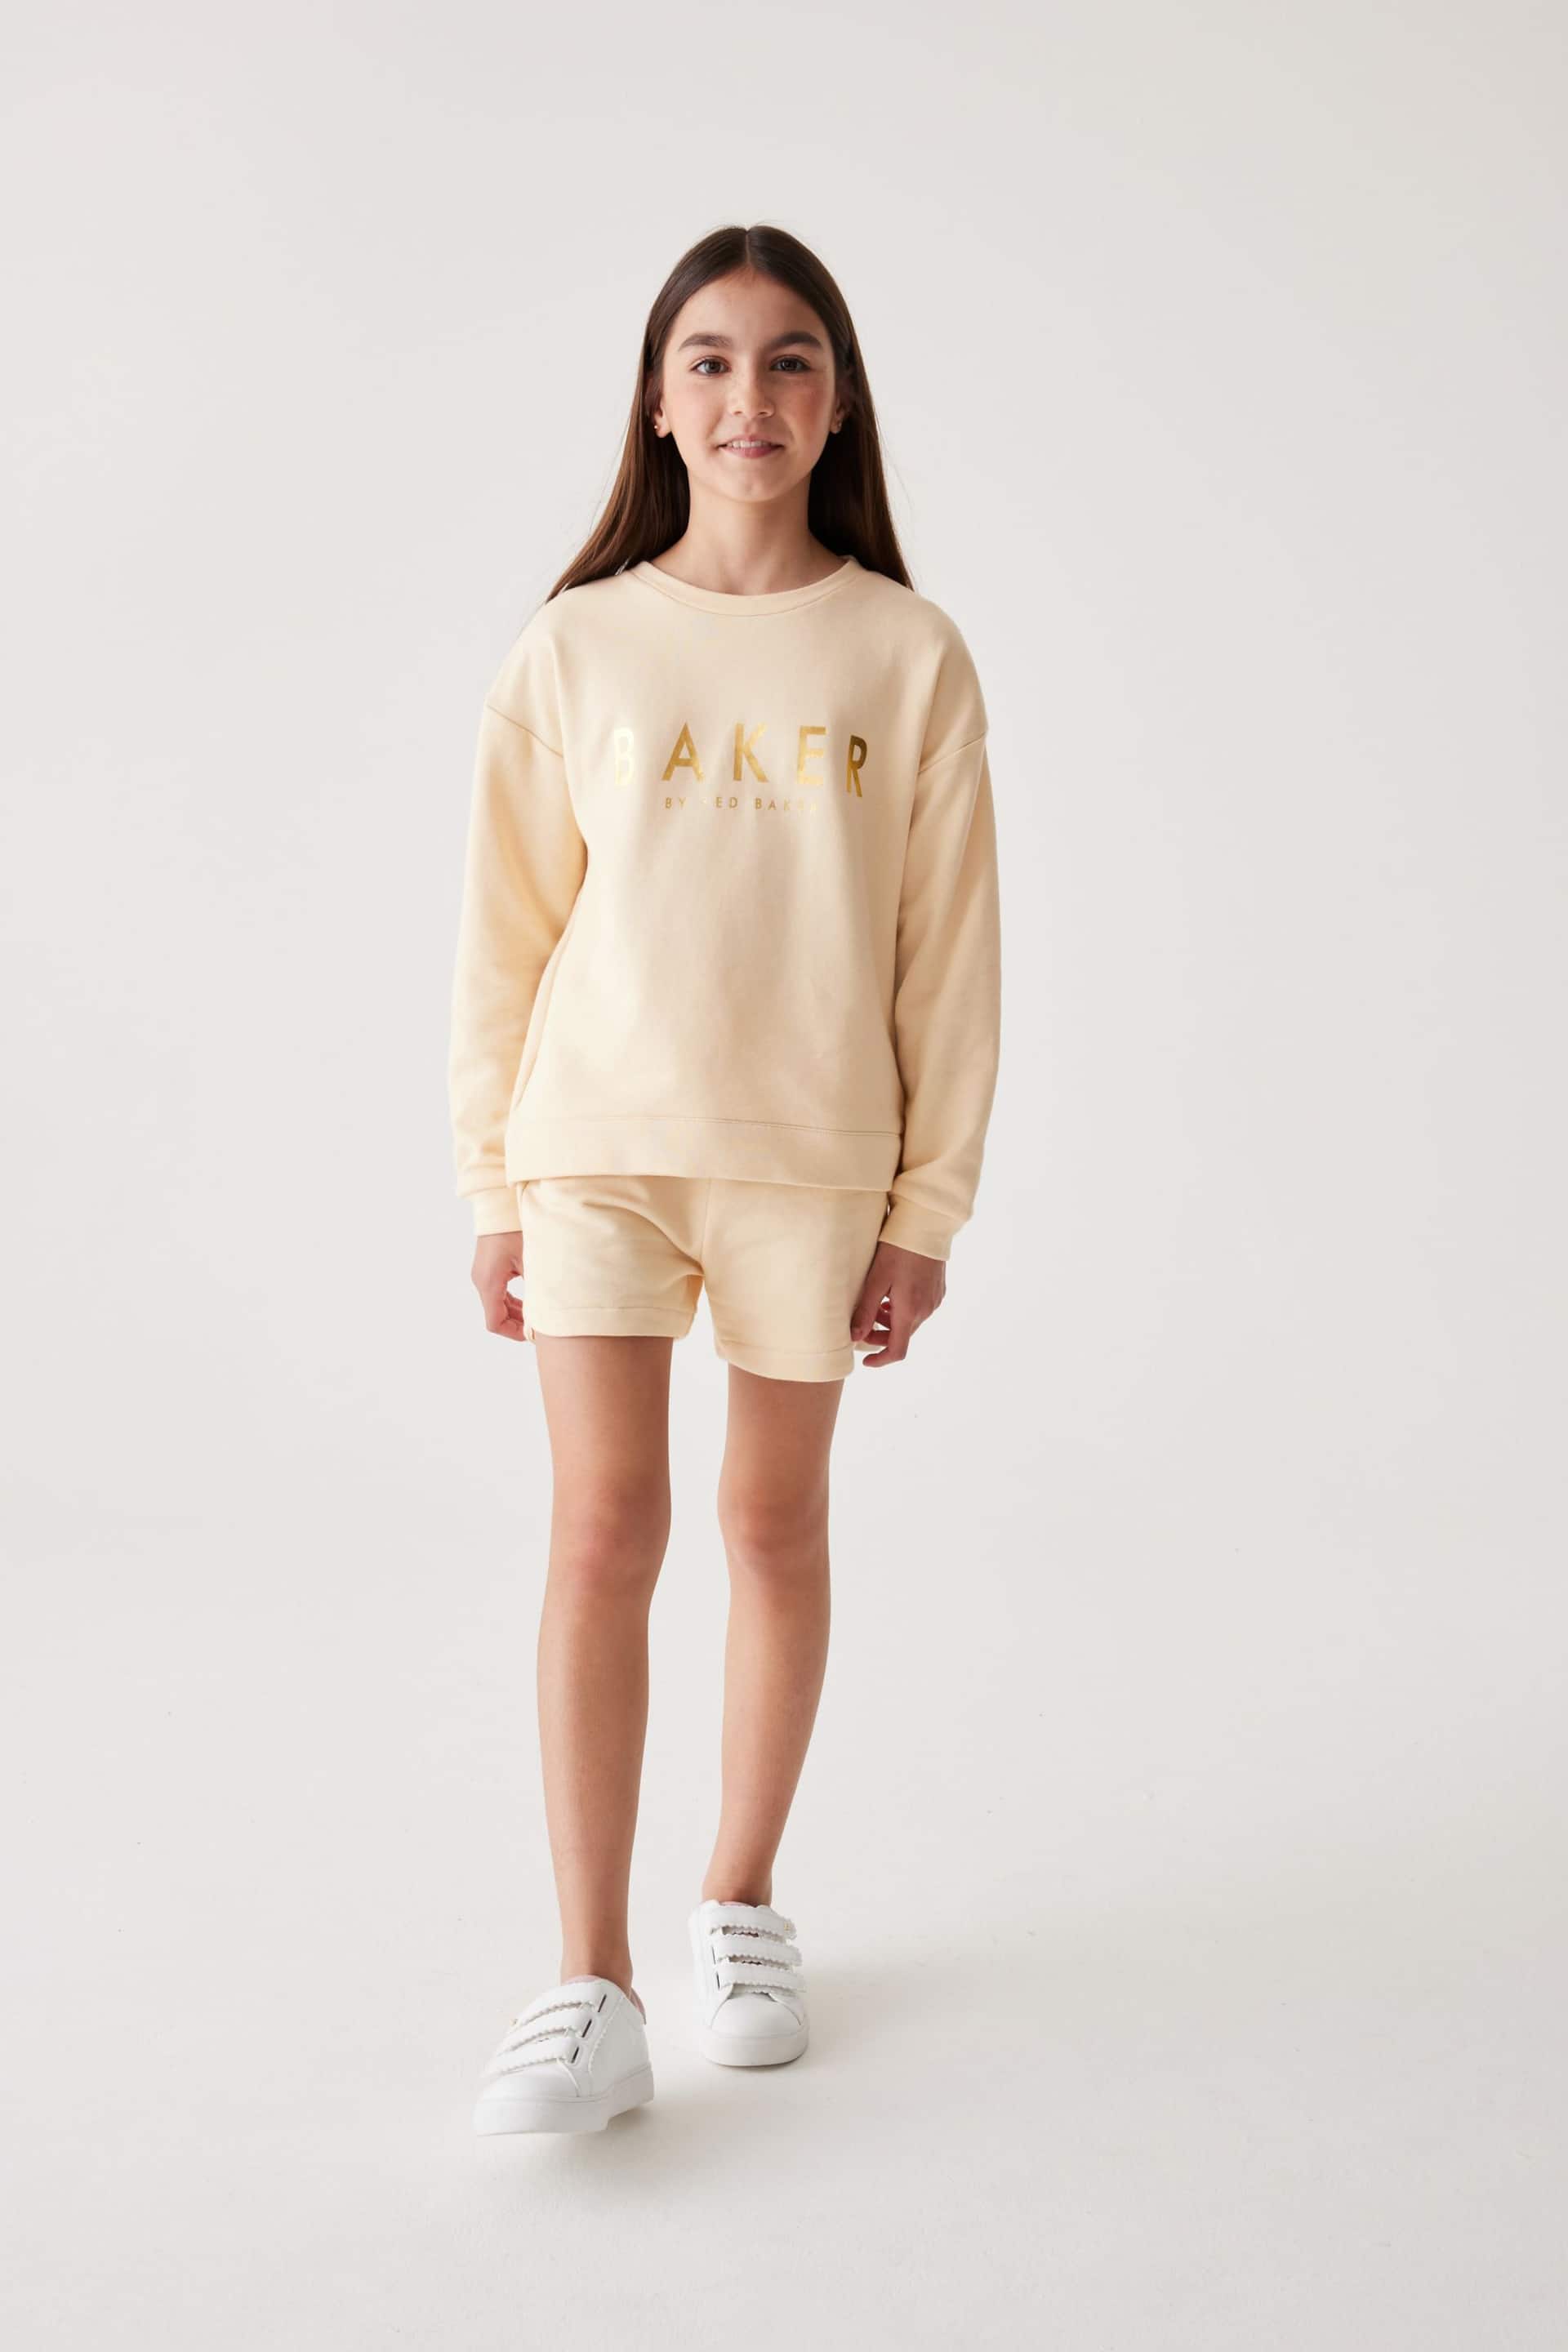 Baker by Ted Baker Stone Split Back Sweater And Shorts Set - Image 4 of 10